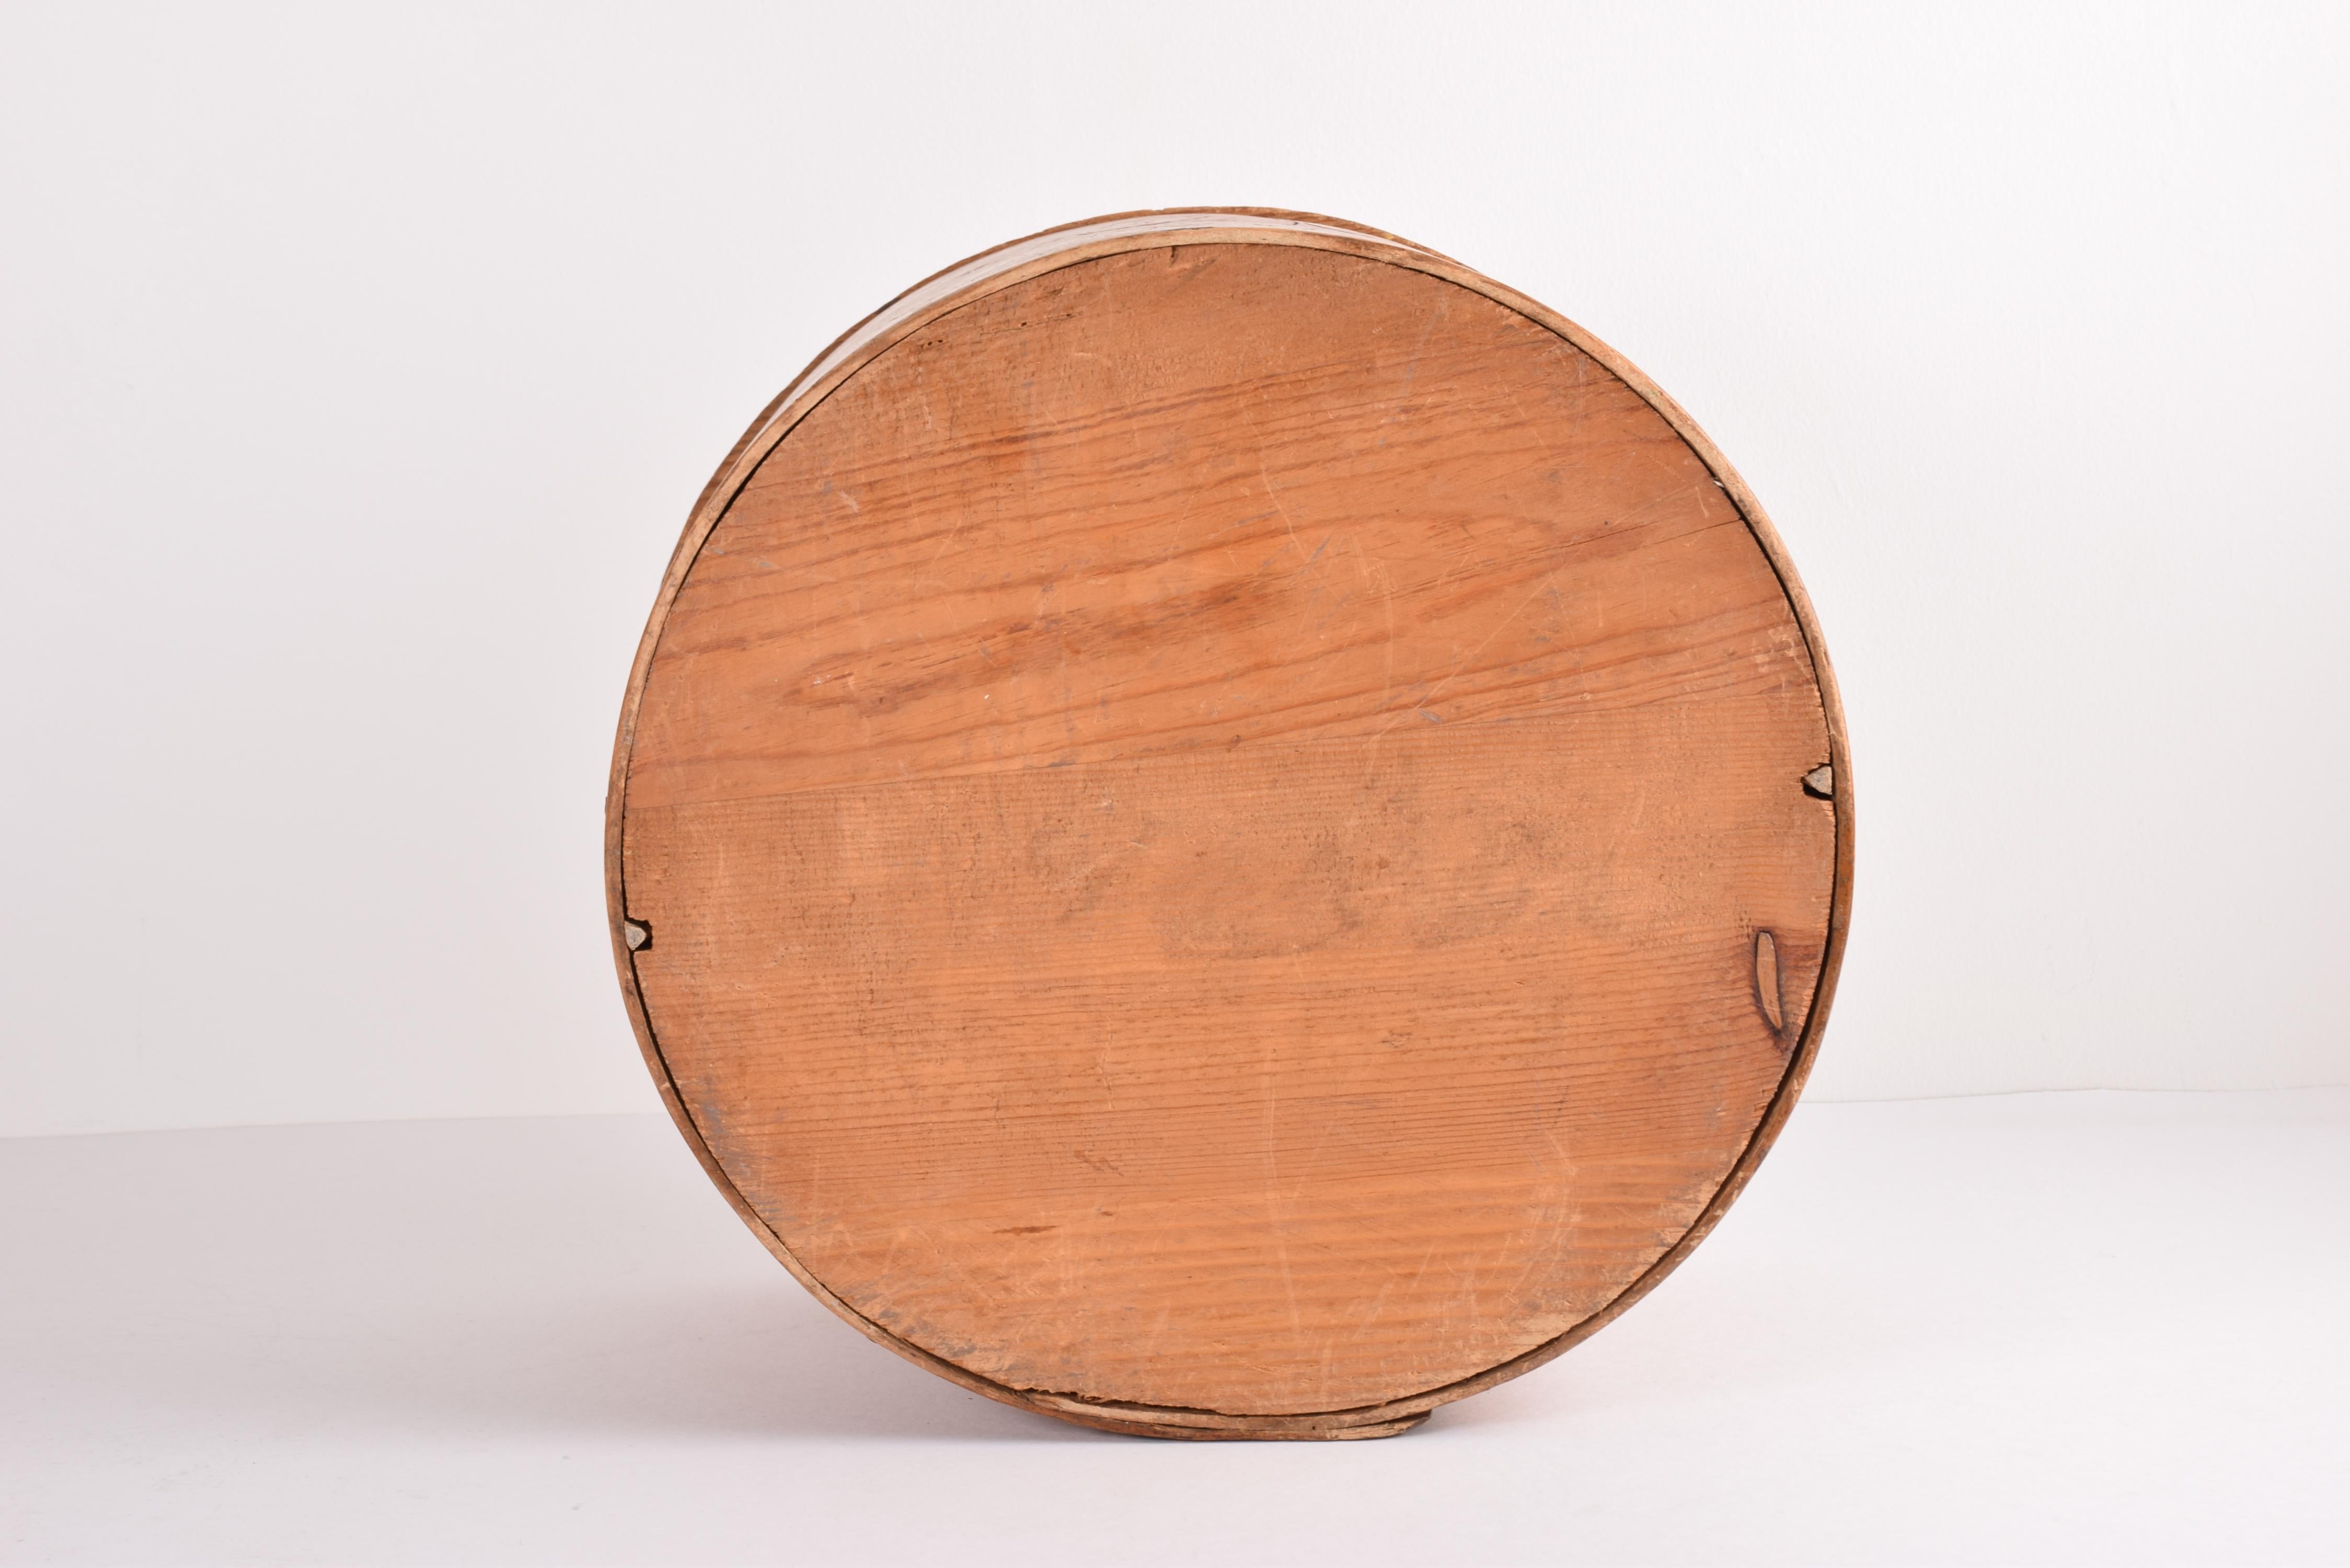 Antique Scandinavian Round Storage Box “Tejne” Decorated Pine, Late 19th Century For Sale 6